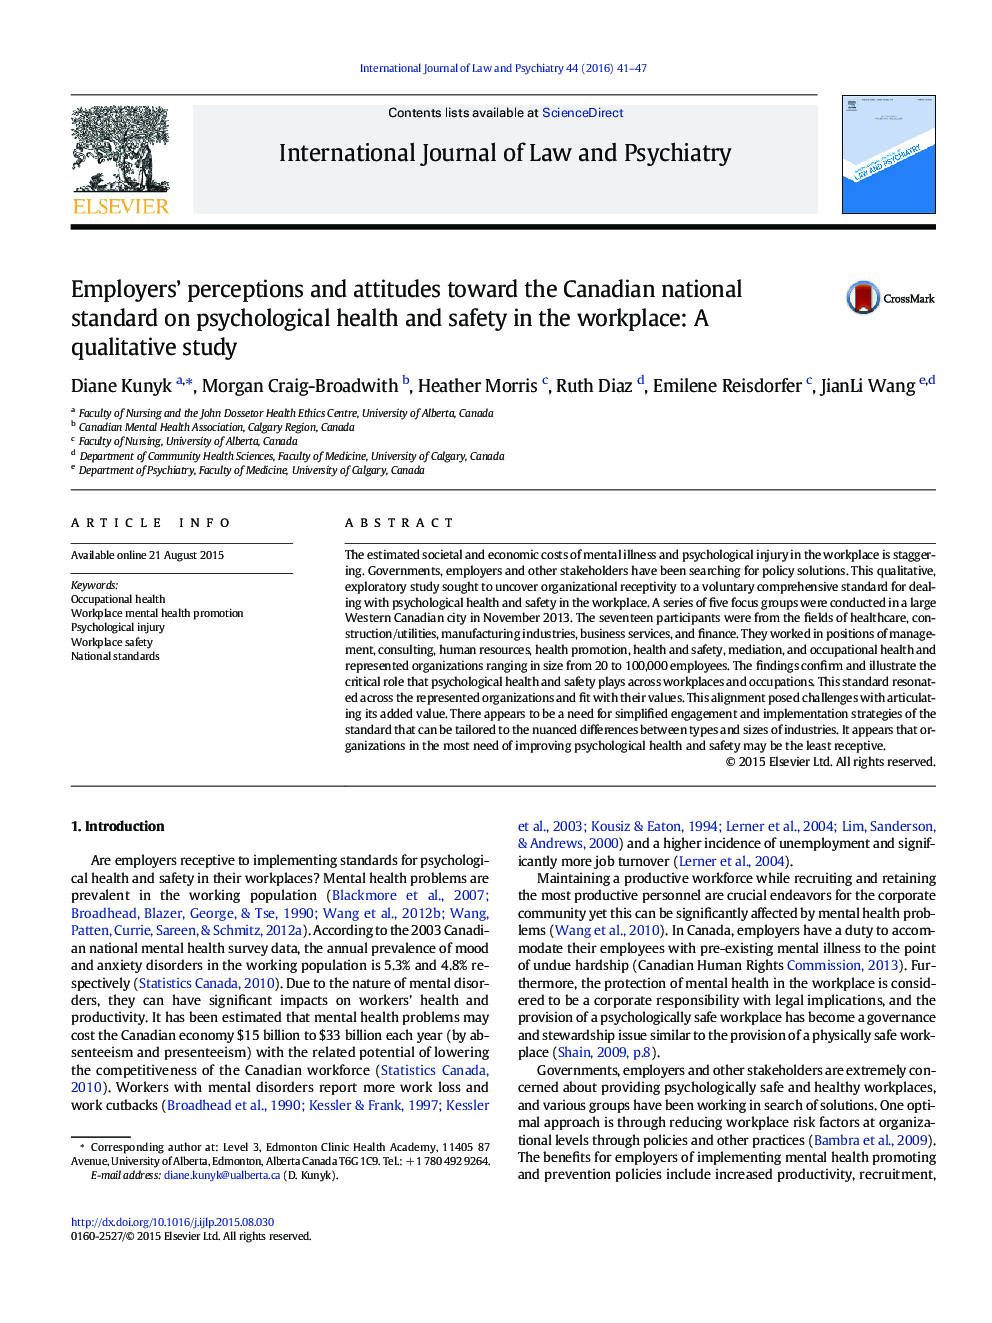 Employers’ perceptions and attitudes toward the Canadian national standard on psychological health and safety in the workplace: A qualitative study